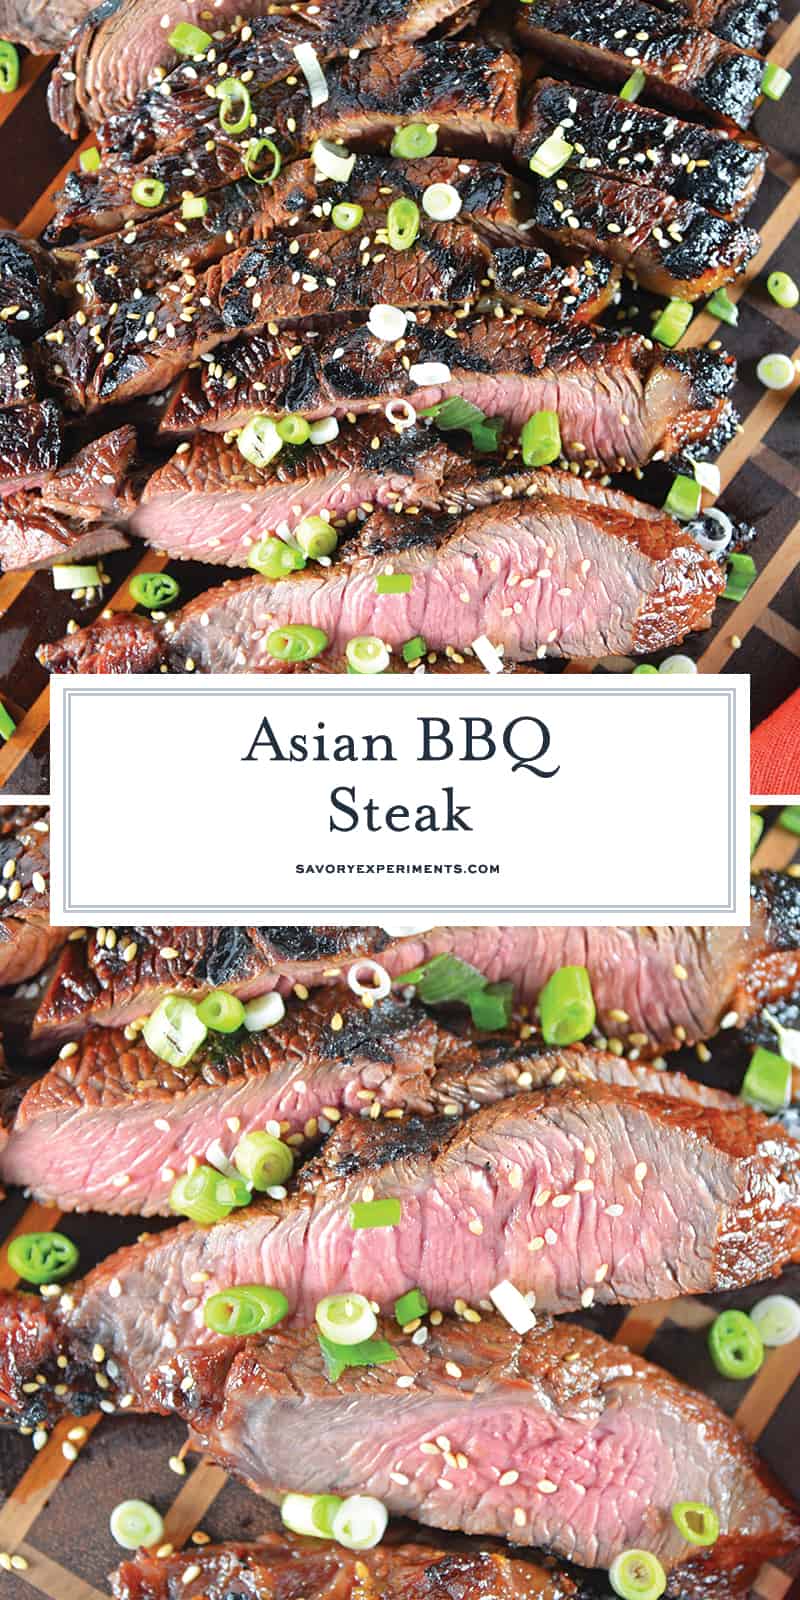 Asian BBQ Steak marinade can be used on any cut of beef, combining traditional Asian flavors like soy sauce, honey, ginger, sesame and garlic. #steakmarinade #bbqsteak #beefrecipe www.savoryexperiments.com 